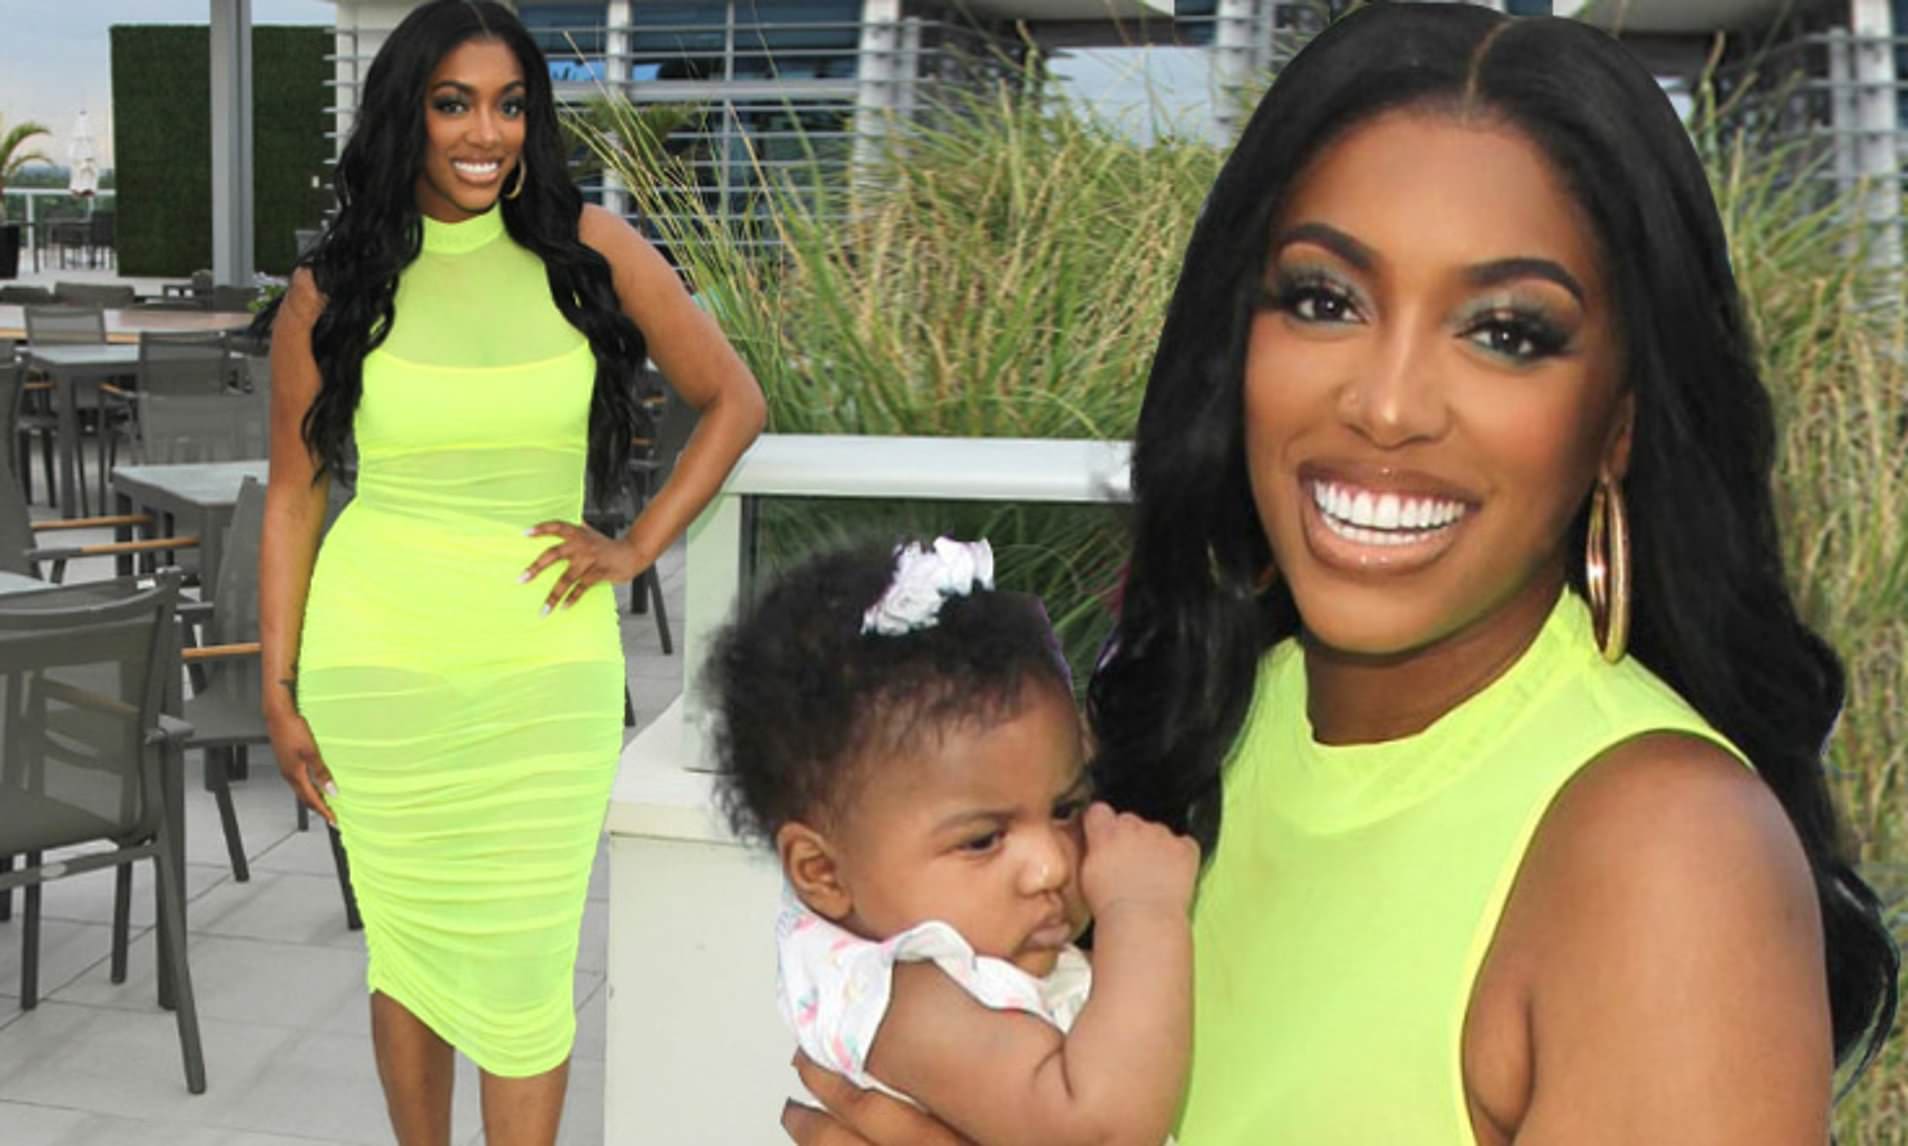 Porsha Williams' Latest Video Featuring Pilar Jhena With A face Full Of Make Up Has Fans Laughing Like Crazy